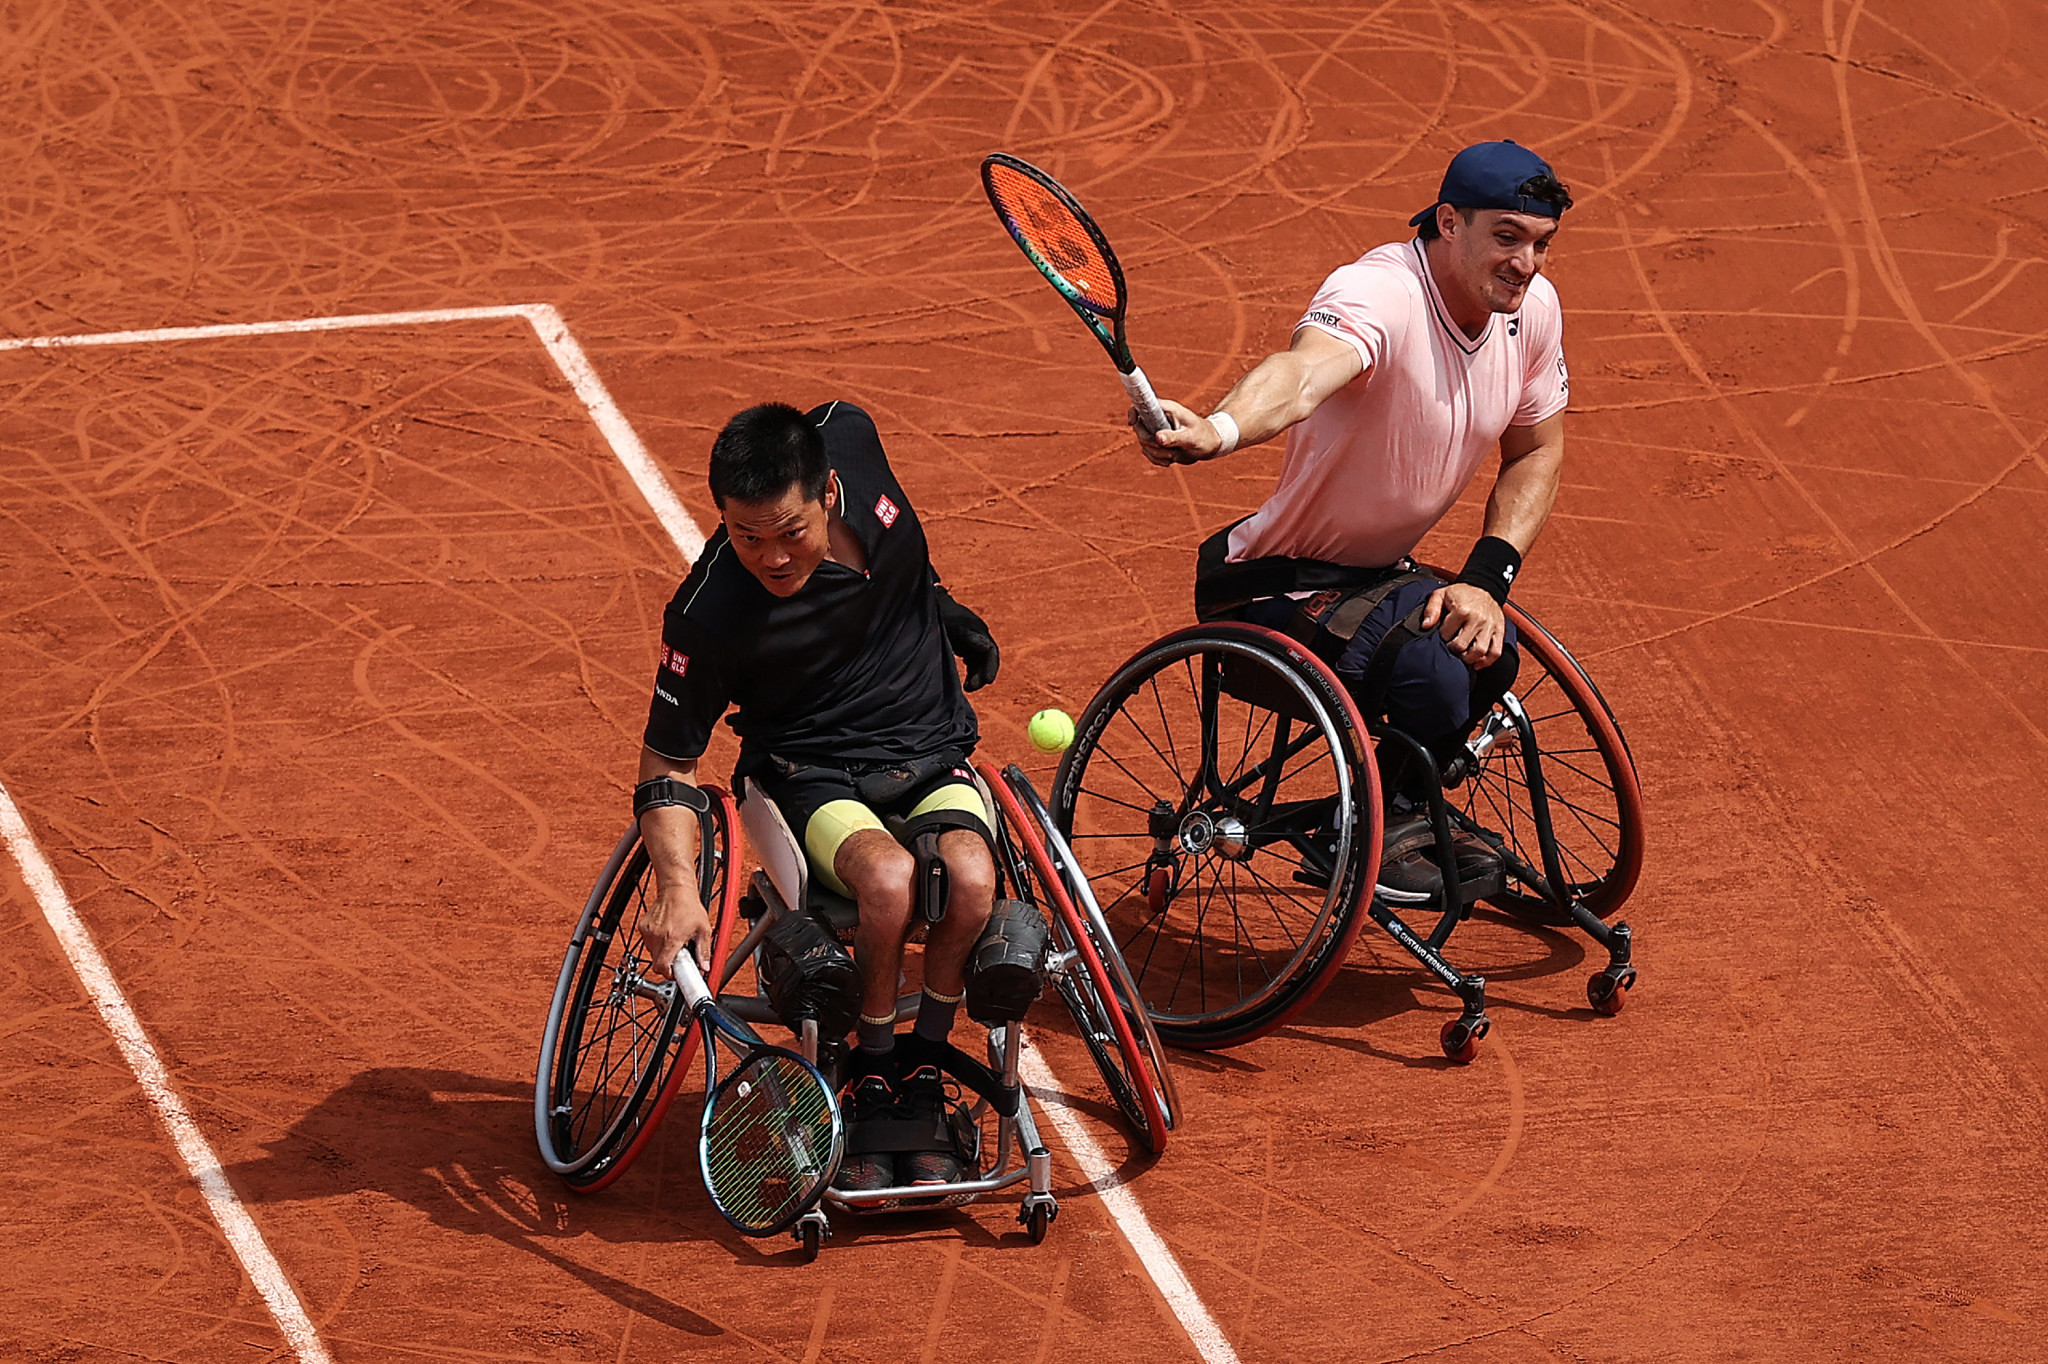 Argentina's Gustavo Fernández, right, and Japan's Shingo Kunieda, left, beat men's doubles Paralympic champions Stéphane Houdet and Nicolas Peifer ©Getty Images
